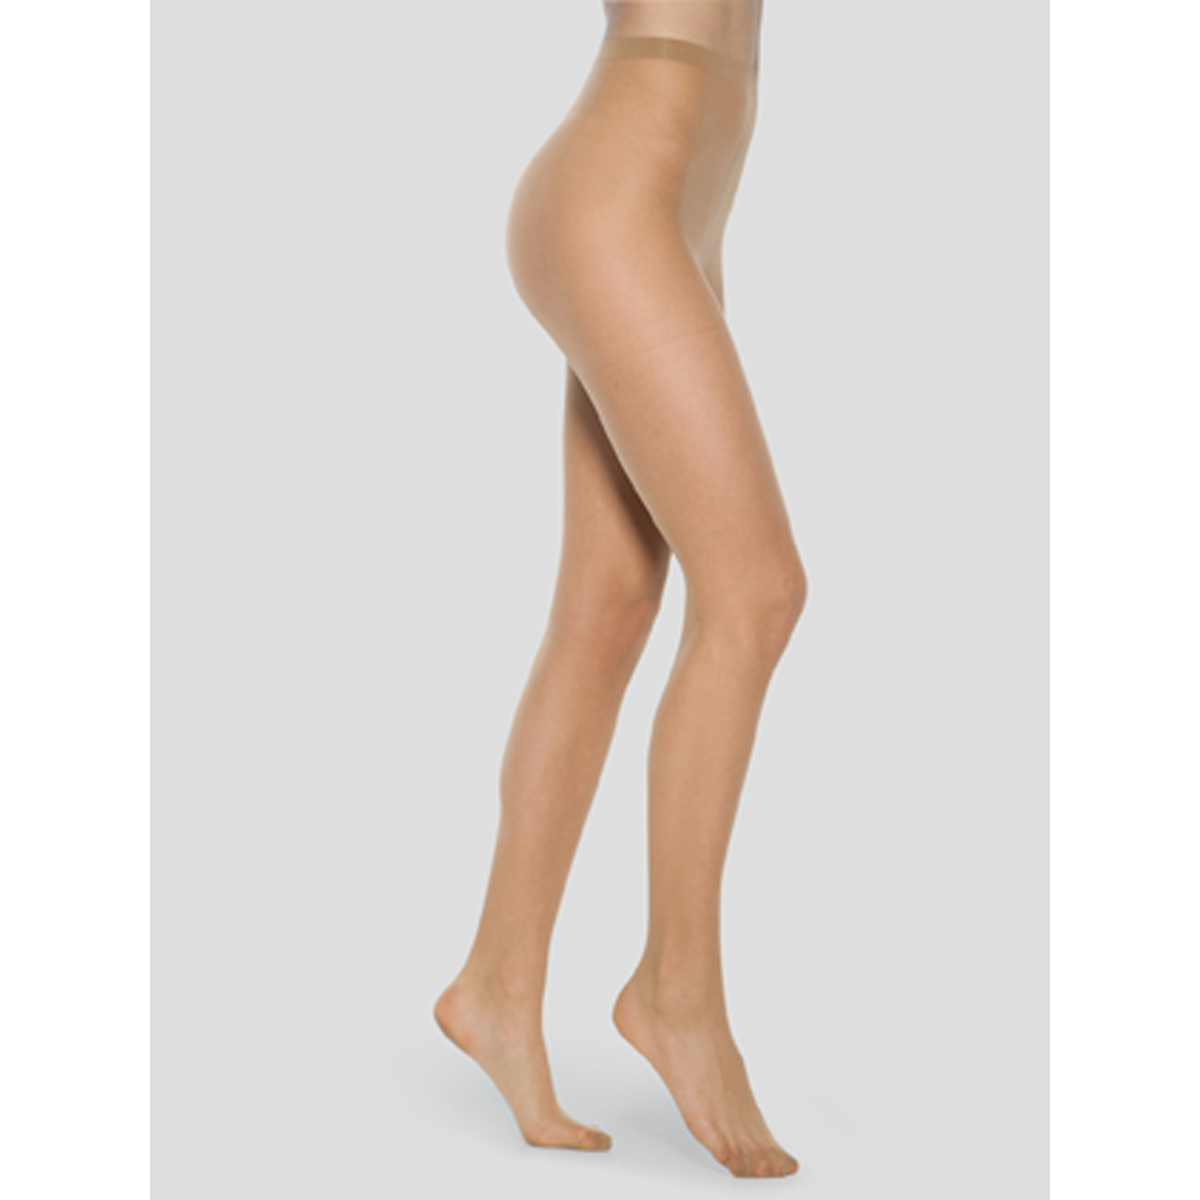 Daxon Rose by - Collant anti-fatigue mousse 40 deniers oFjSwKfz